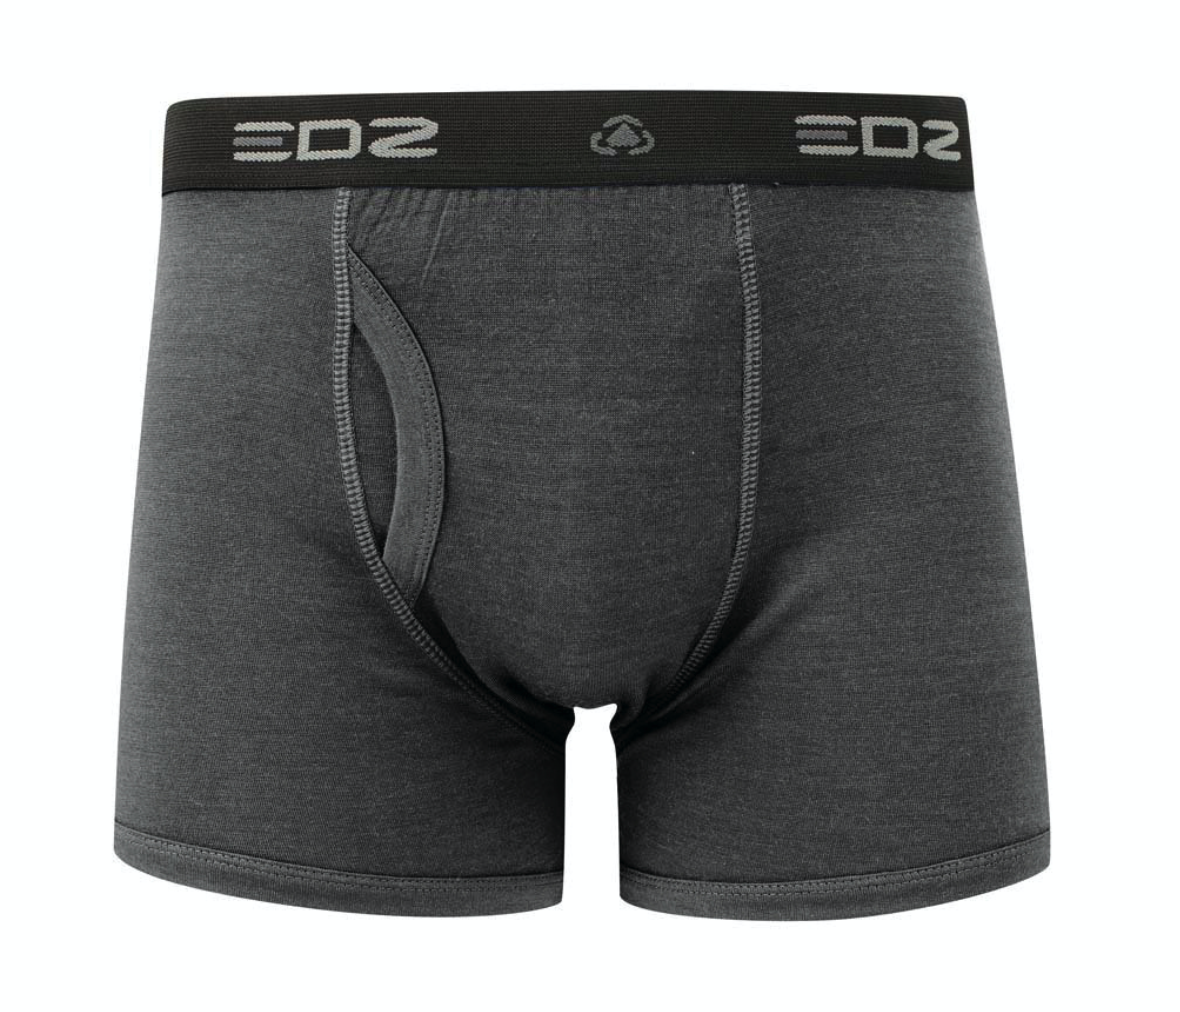 9 Best Sports Boxers For Men: Work Out in Comfort – Men's Fitness UK